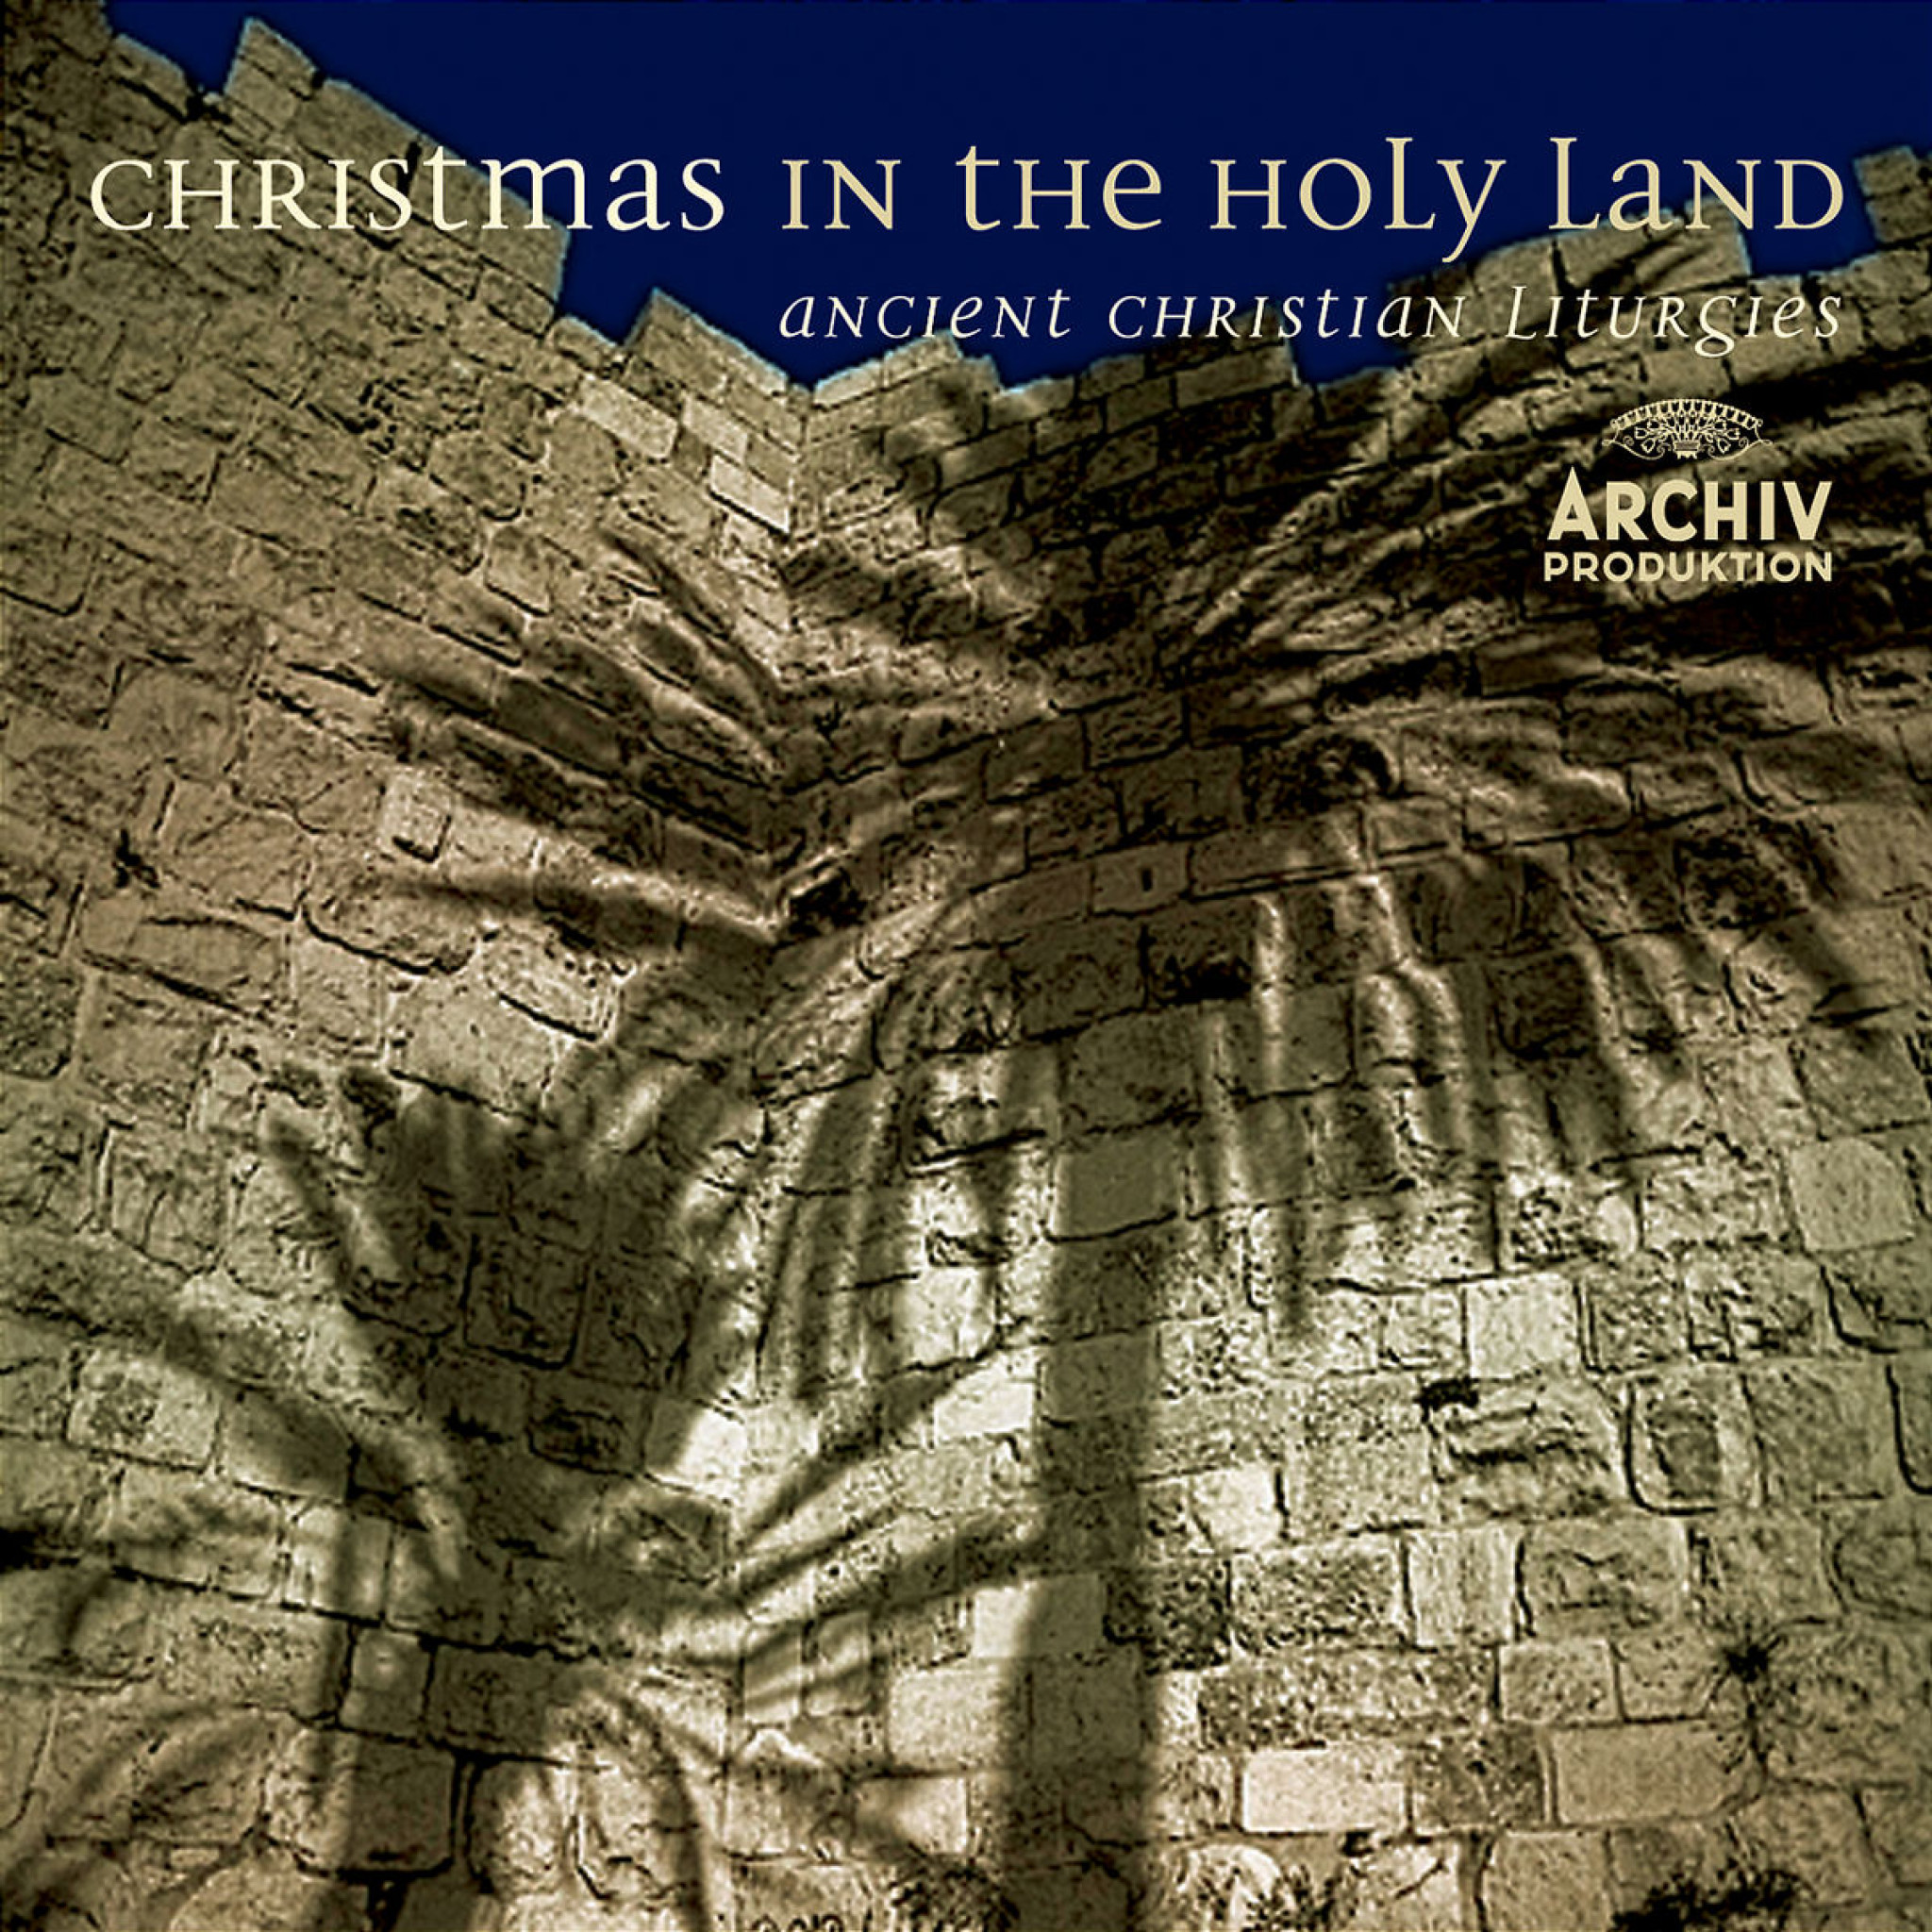 CHRISTMAS IN THE HOLY LAND